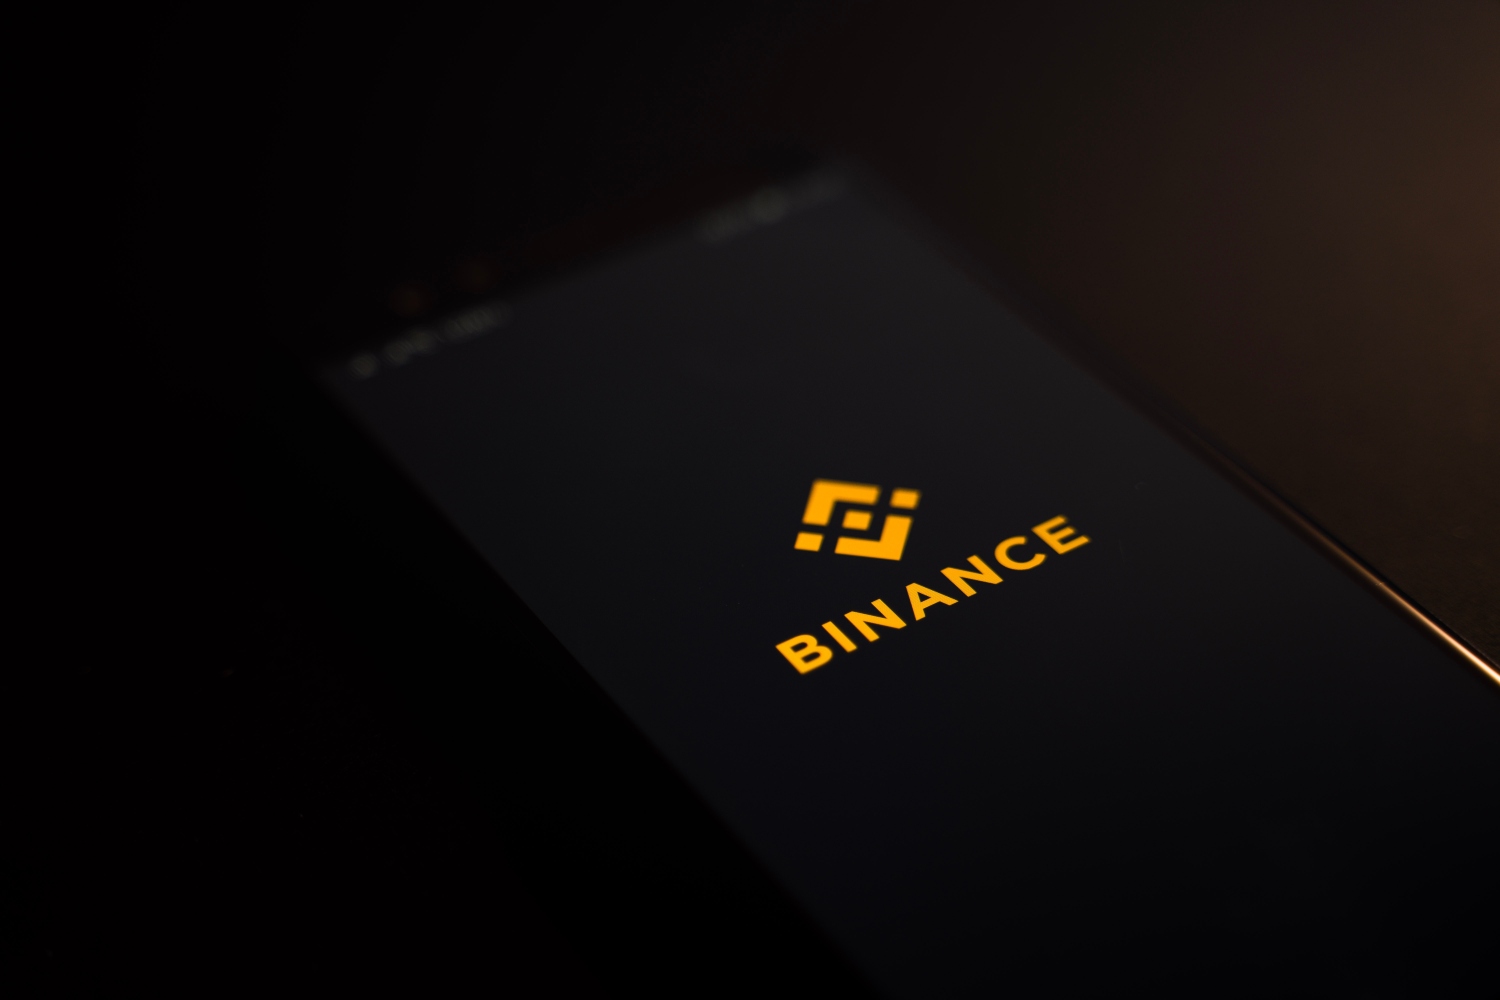 Binance Becomes First Crypto Exchange to Receive Full Regulatory Approval in El Salvador